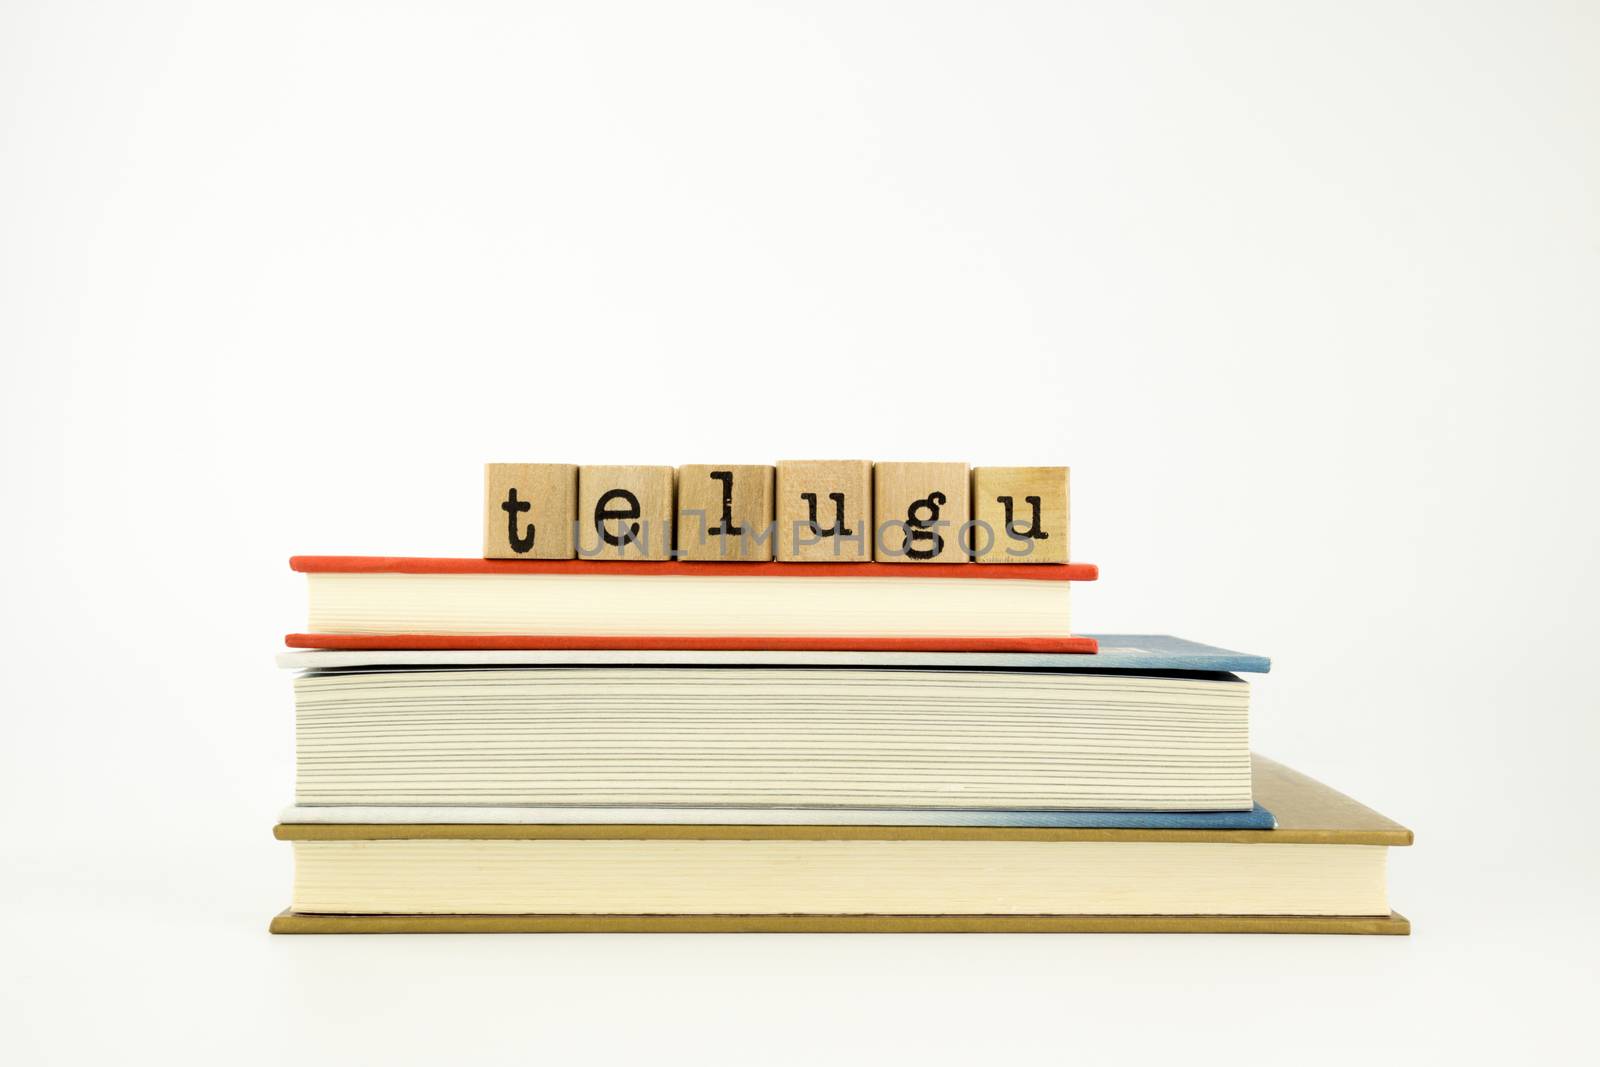 telugu word on wood stamps stack on books, conversation and translation concept